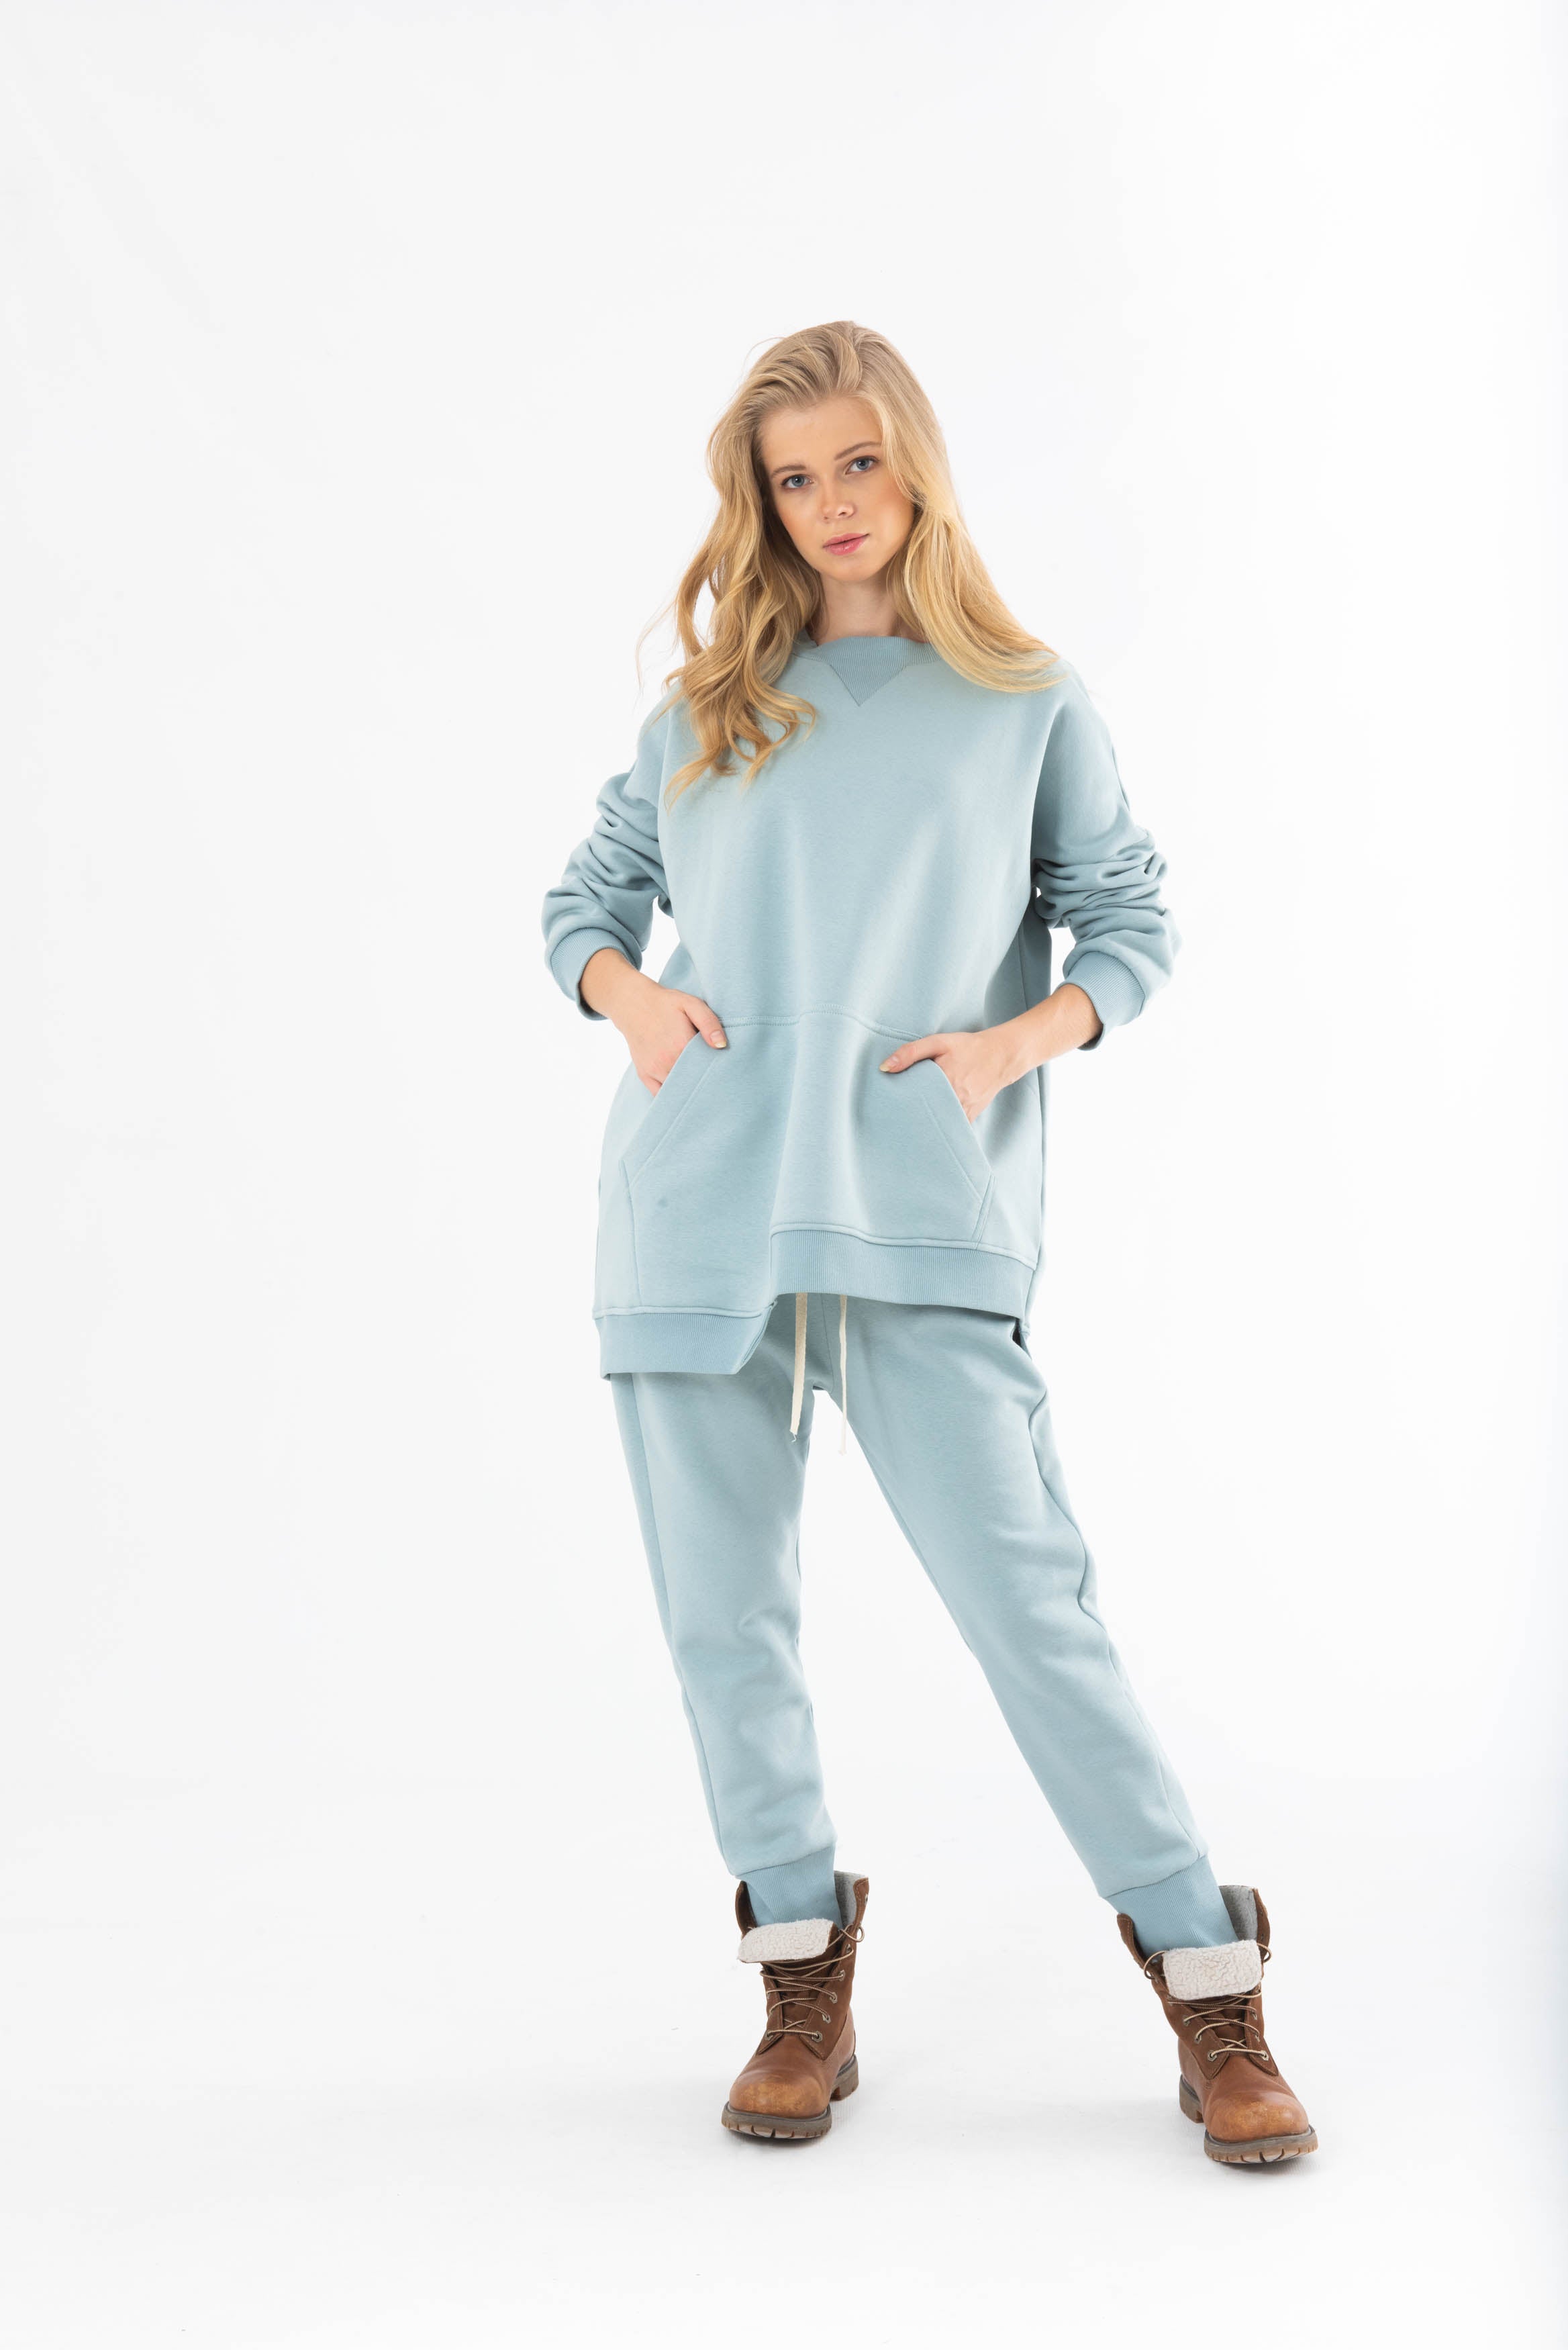 Low Crotch Classic Jogger pants In Sky Blue